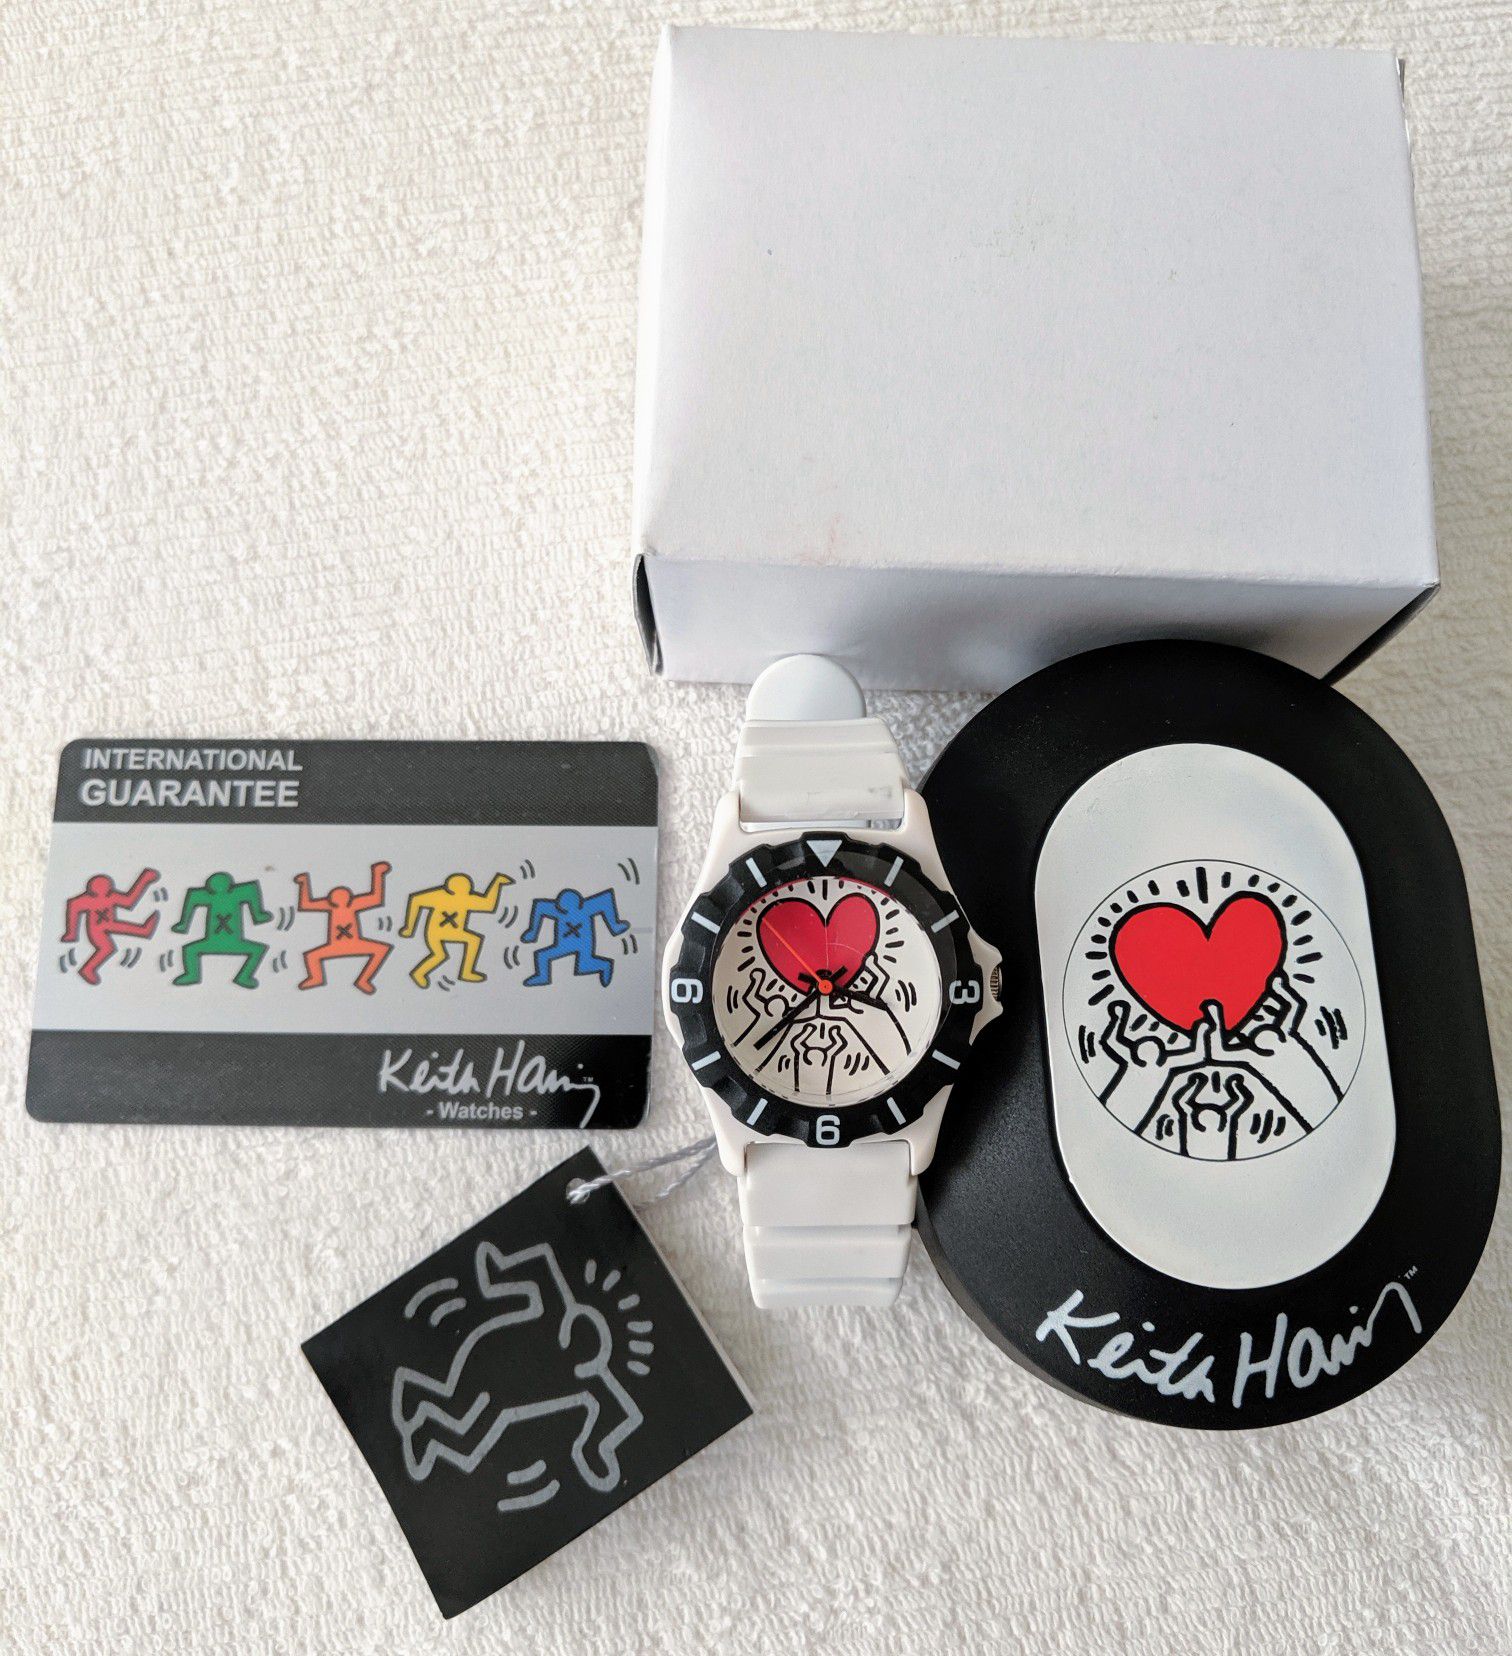 RARE Keith Haring white/black/red love heart unisex art watch - 90s early 2000s vintage collectible - BRAND NEW